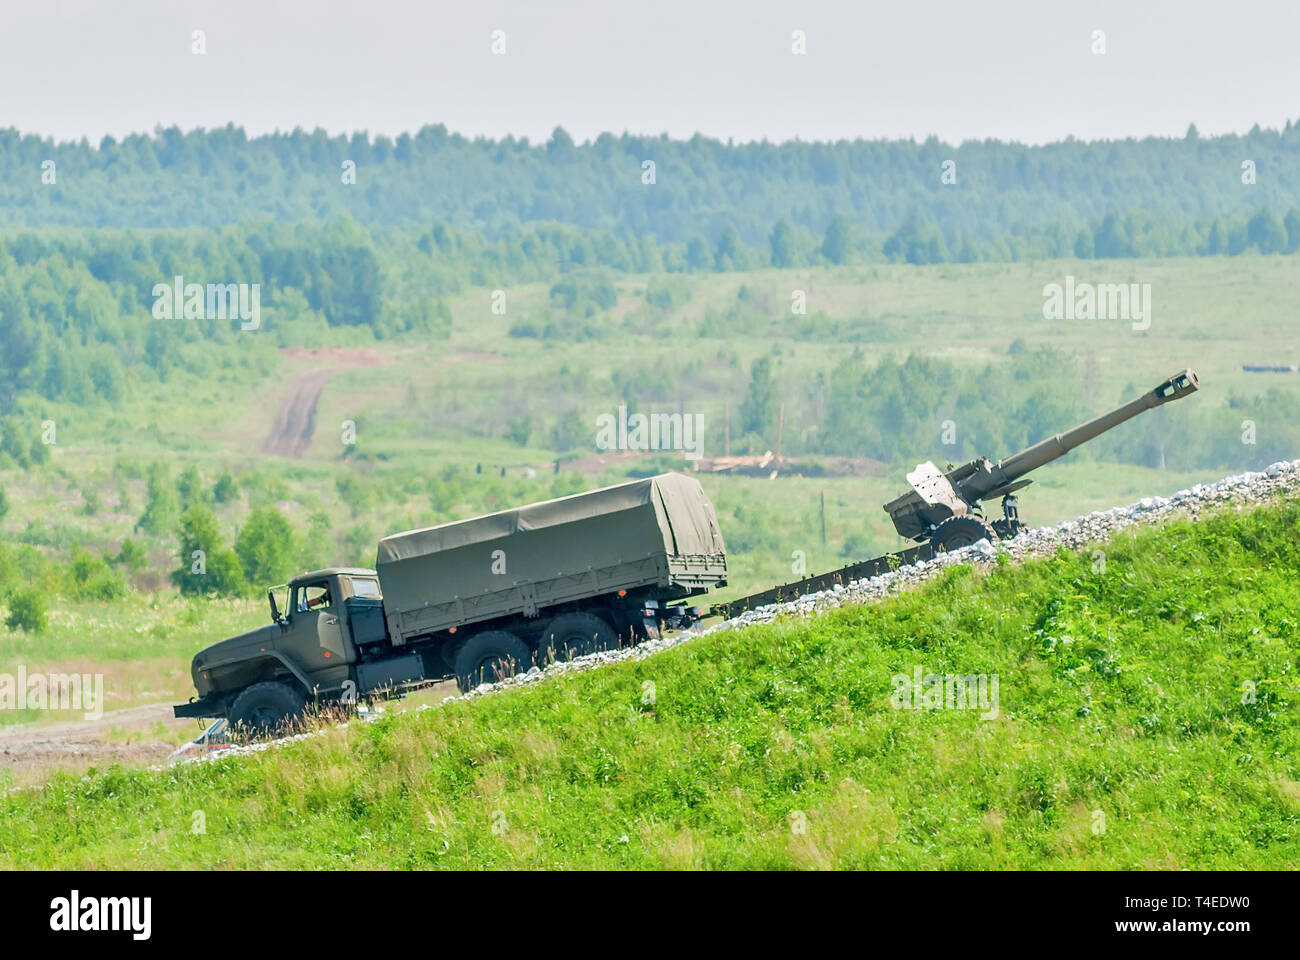 Nizhniy Tagil, Russia - July 12. 2008: army truck with cannon moving to destination point. Russia Arms Expo Stock Photo